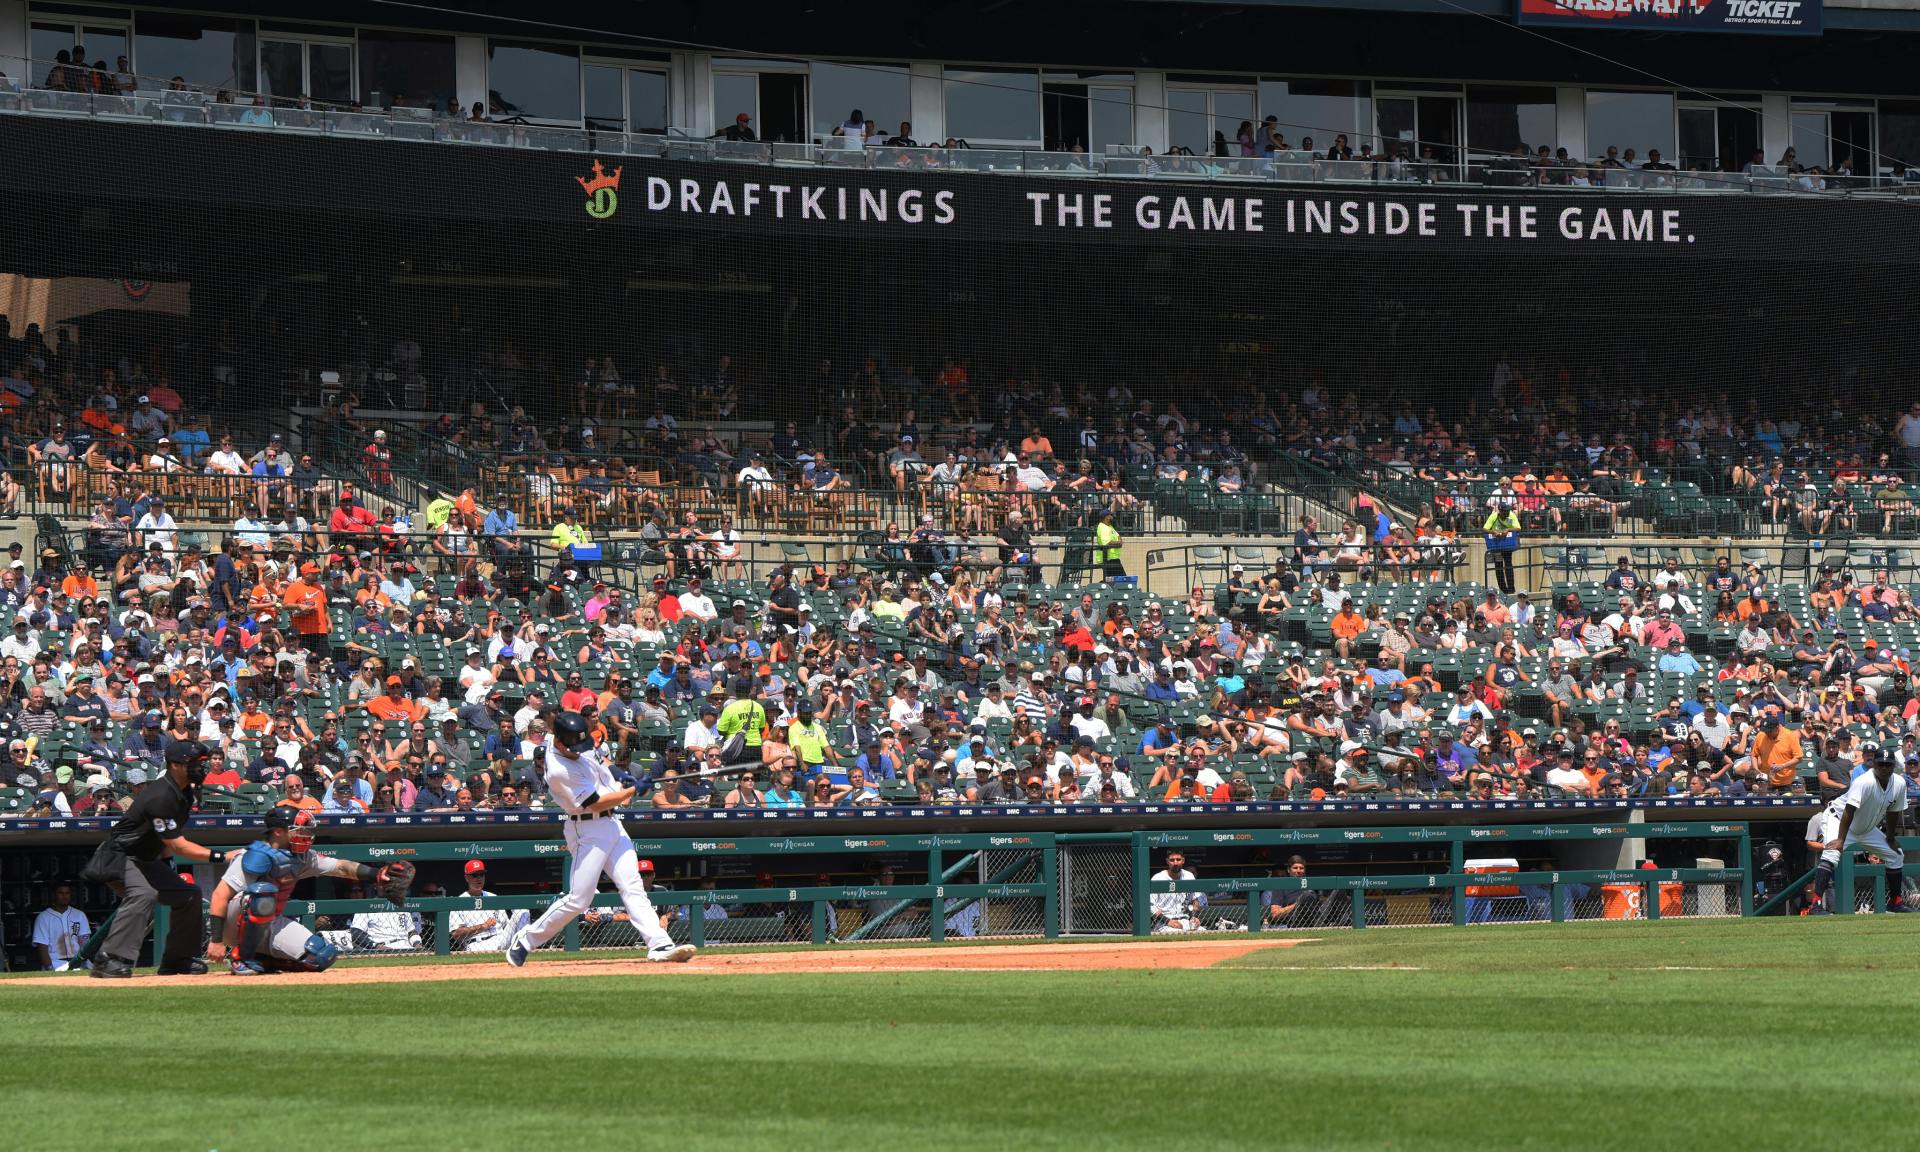 An advertisement for DraftKings is shown on the scoreboard during the game between the Boston Red Sox and the Detroit Tigers